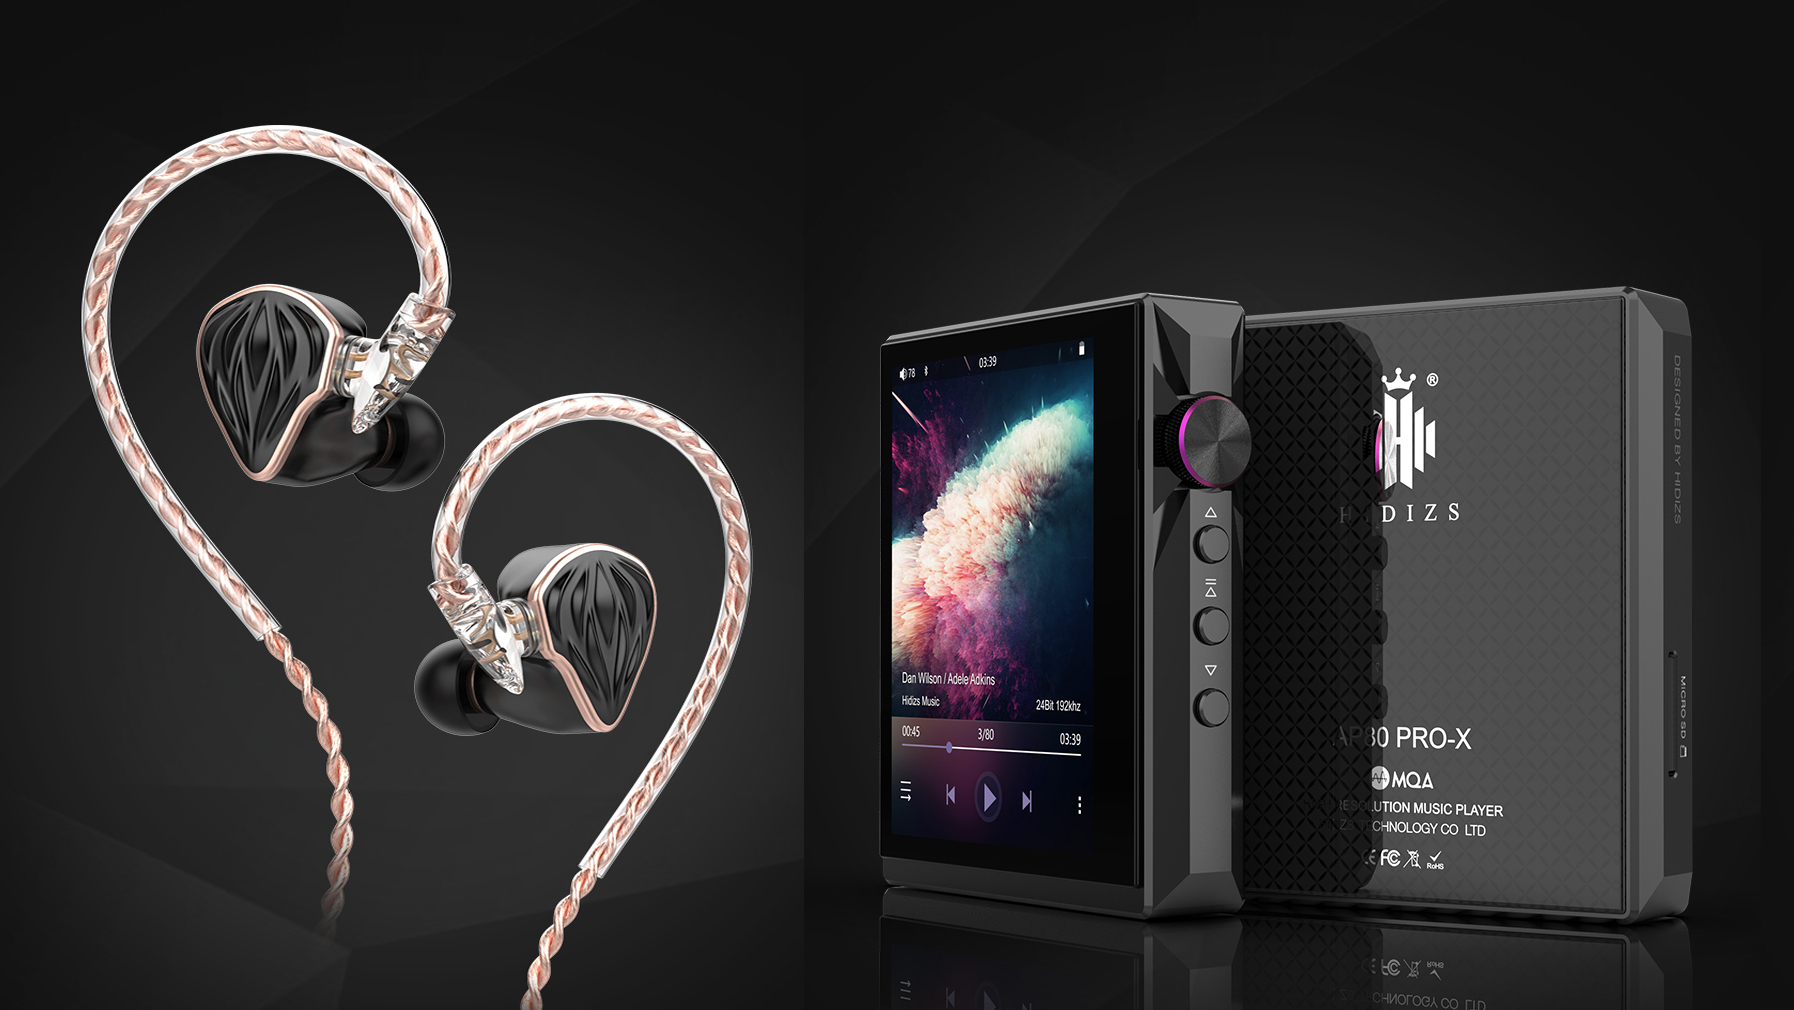 This music player and earbuds pairing is an affordable gateway